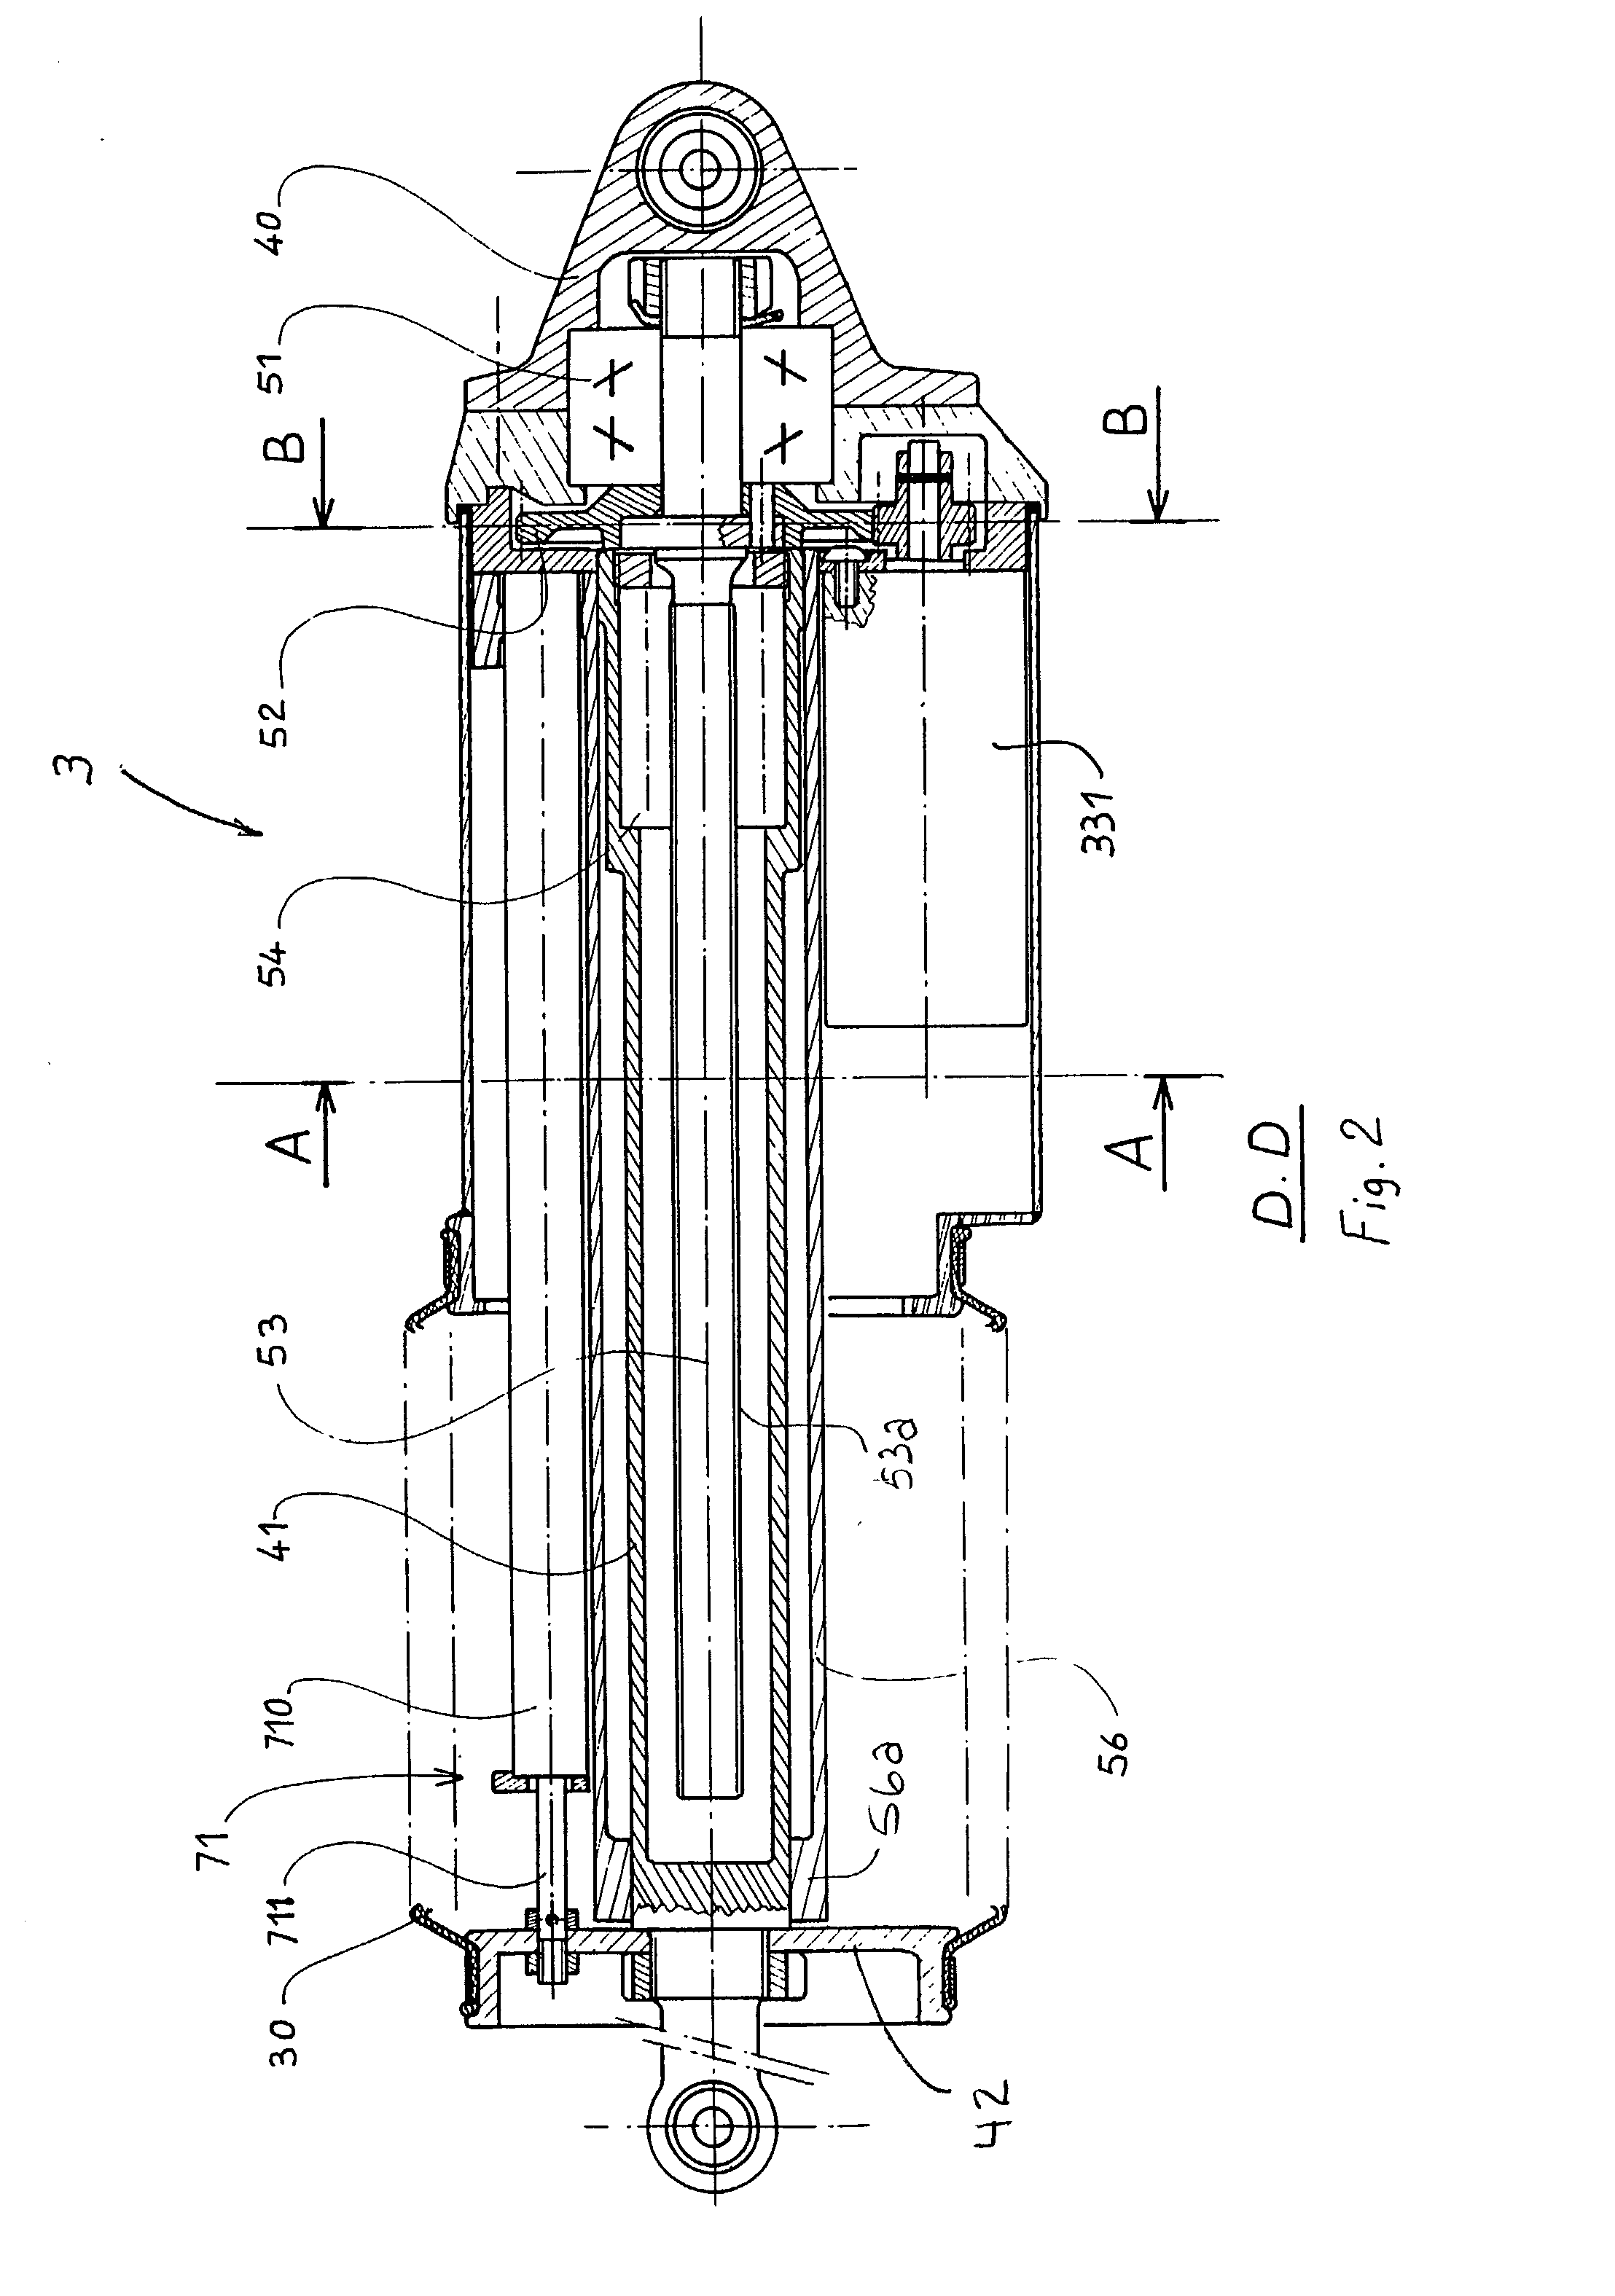 Electrical steering for vehicle, with triple redundancy